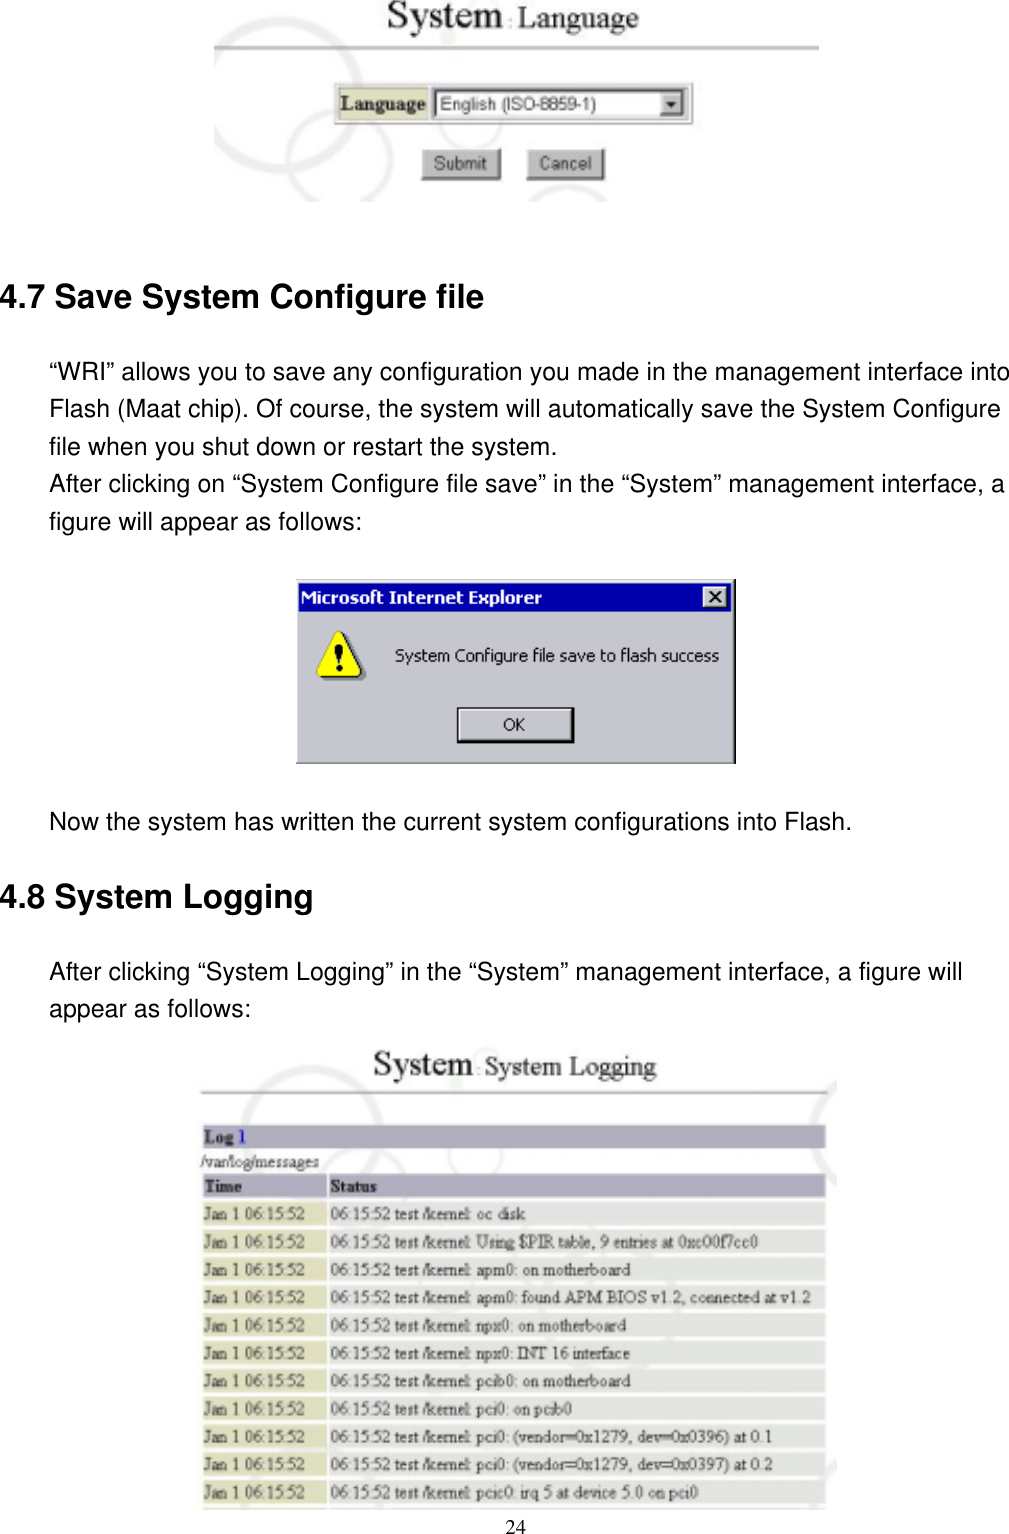  24  4.7 Save System Configure file “WRI” allows you to save any configuration you made in the management interface into Flash (Maat chip). Of course, the system will automatically save the System Configure file when you shut down or restart the system. After clicking on “System Configure file save” in the “System” management interface, a figure will appear as follows:    Now the system has written the current system configurations into Flash. 4.8 System Logging After clicking “System Logging” in the “System” management interface, a figure will appear as follows:  